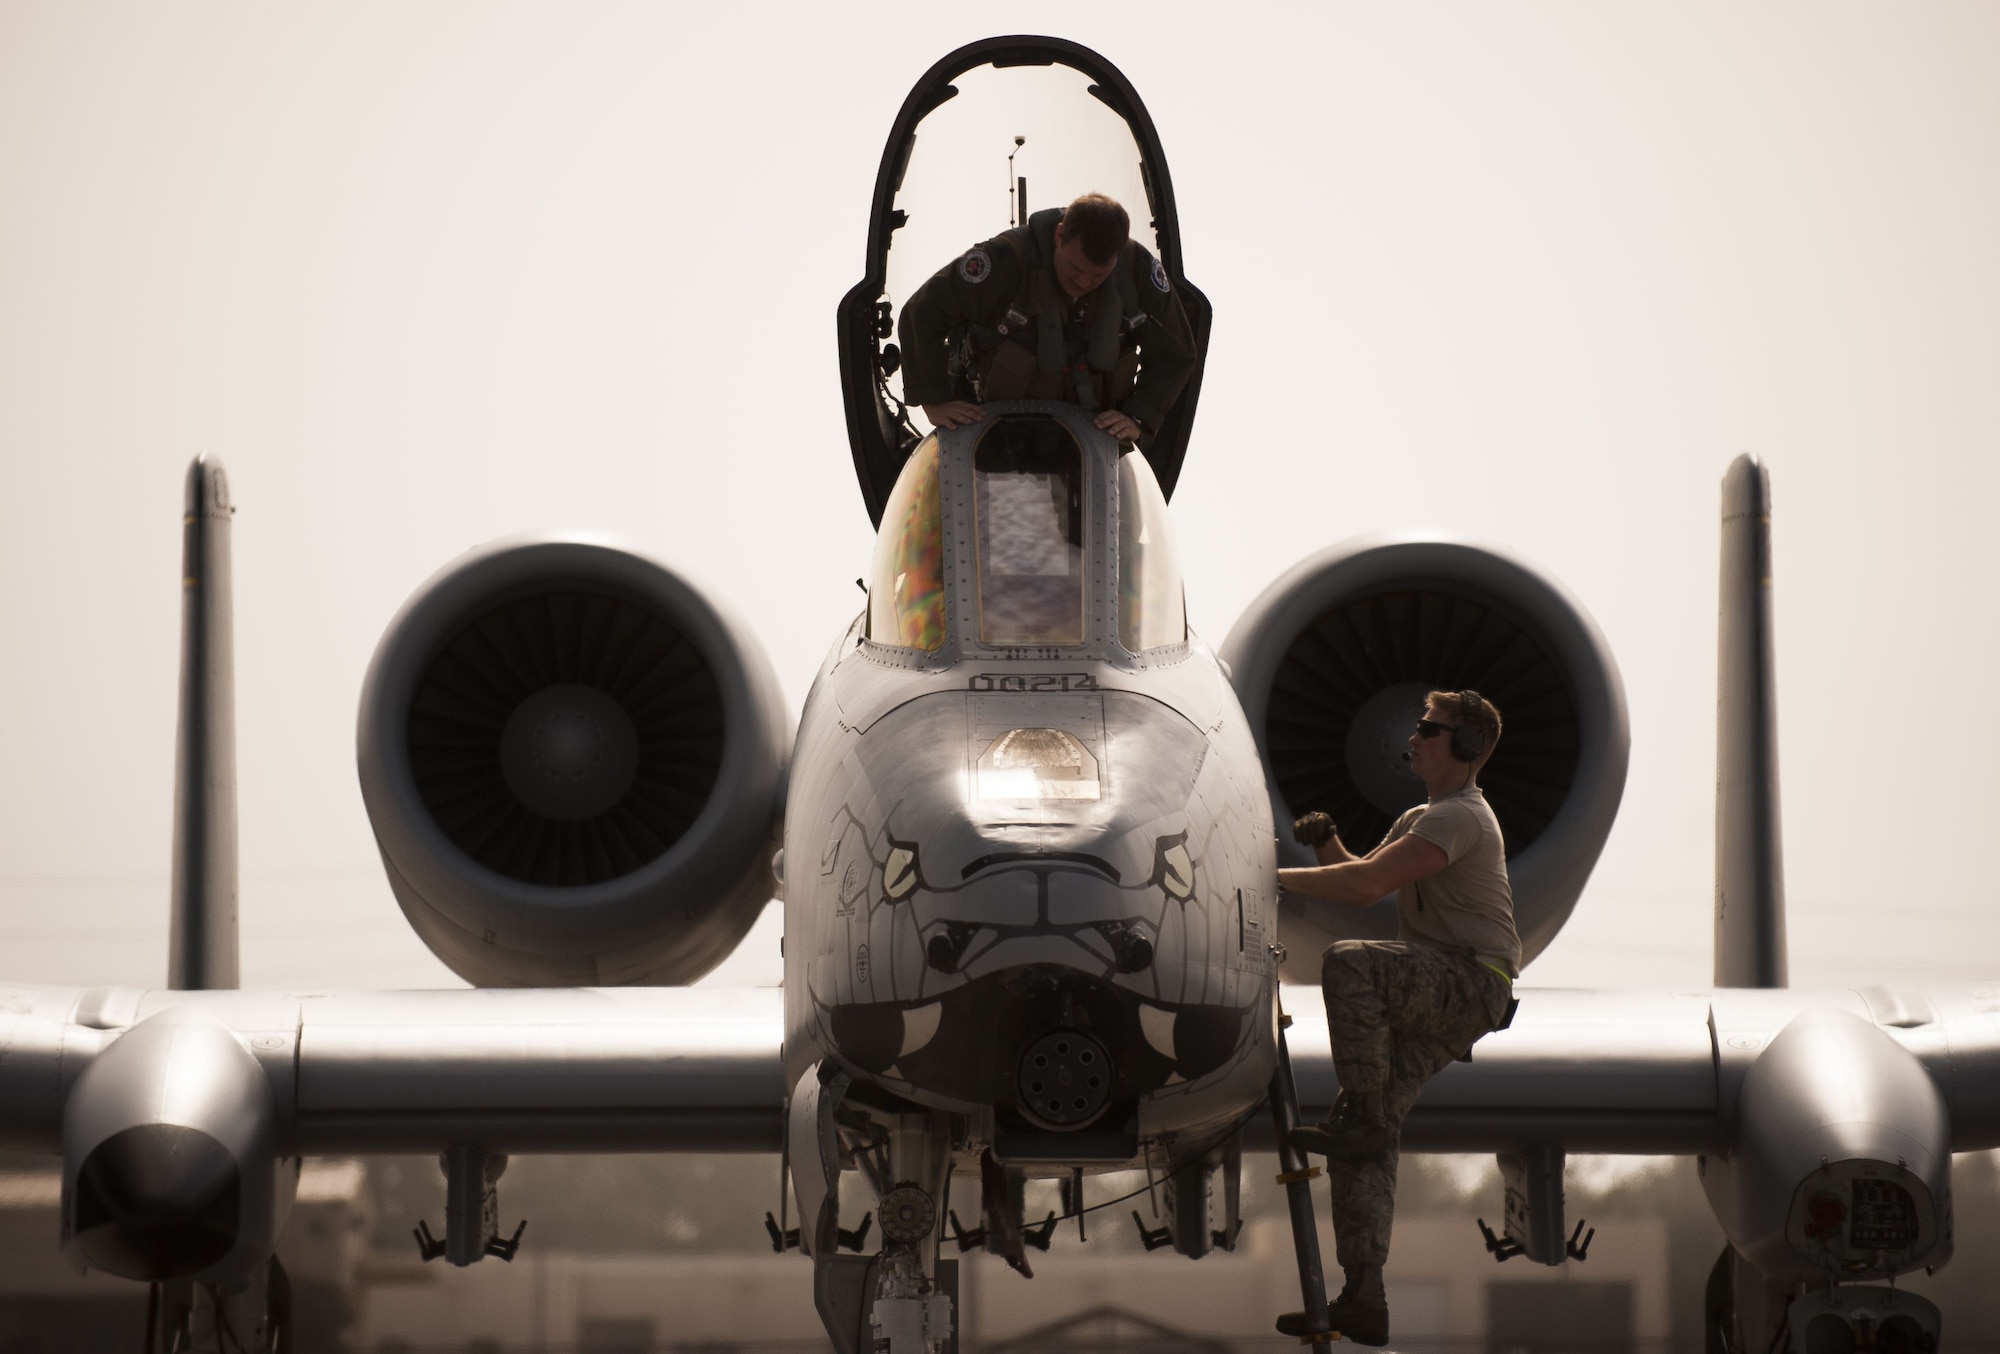 A pilot from the 163rd Fighter Squadron, left, and Staff Sgt. Michael Gresley, 122nd Aircraft Maintenance crew chief, 122nd Fighter Wing, Fort Wayne, Ind., climb to the cockpit of an A-10C “Warthog” aircraft during Operation Guardian Blitz, Jan. 23, 2018, at MacDill Air Force Base, Fla. Both crew chief and pilot perform inspections prior to takeoff to ensure success of the mission. The 122nd Fighter Wing and the 163rd Fighter Squadron constantly train to ensure our members are always prepared to defend the nation. (U.S. Air National Guard photo by Staff Sgt. William Hopper)